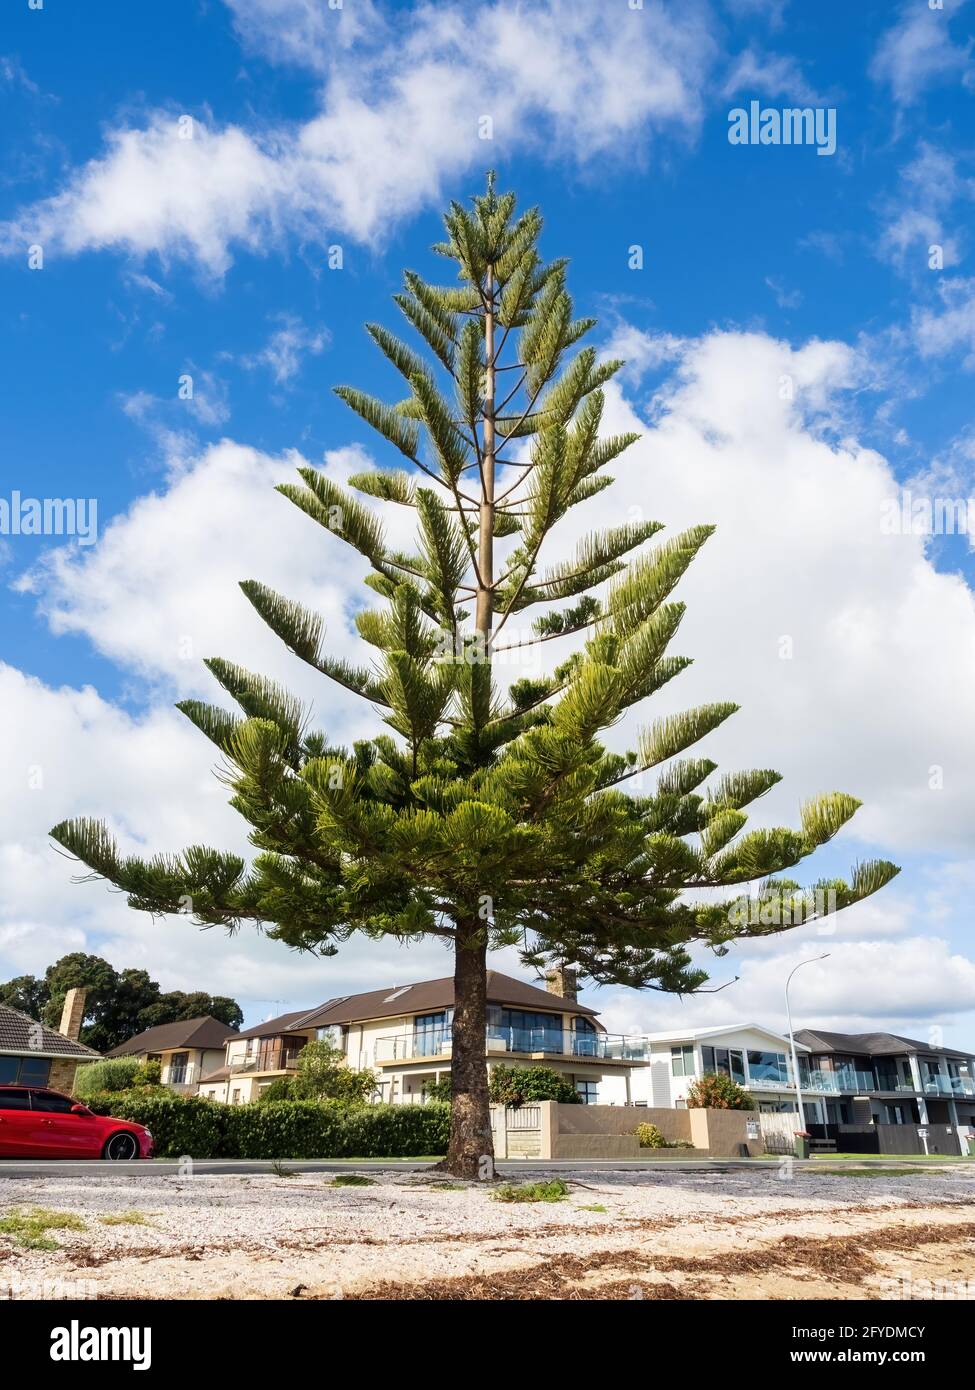 AUCKLAND, NEW ZEALAND - May 19, 2021: View of Norfolk Island pine at Bucklands Beach. Auckland, New Zealand - May 13, 2021 Stock Photo